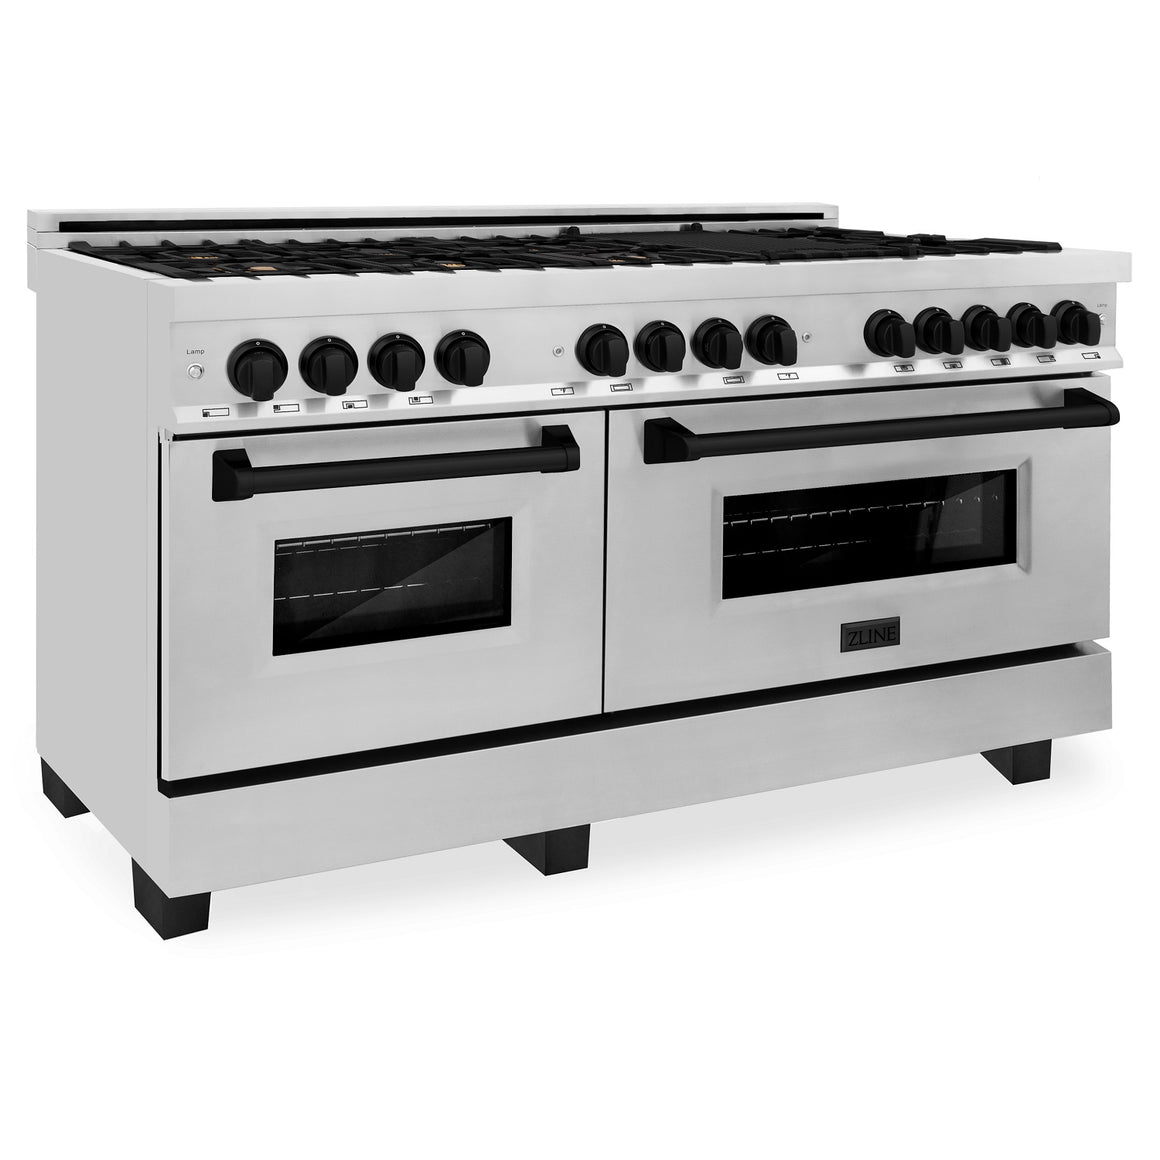 ZLINE Autograph Edition 60" 7.4 cu. ft. Dual Fuel Range in Stainless Steel with Matte Black Accents